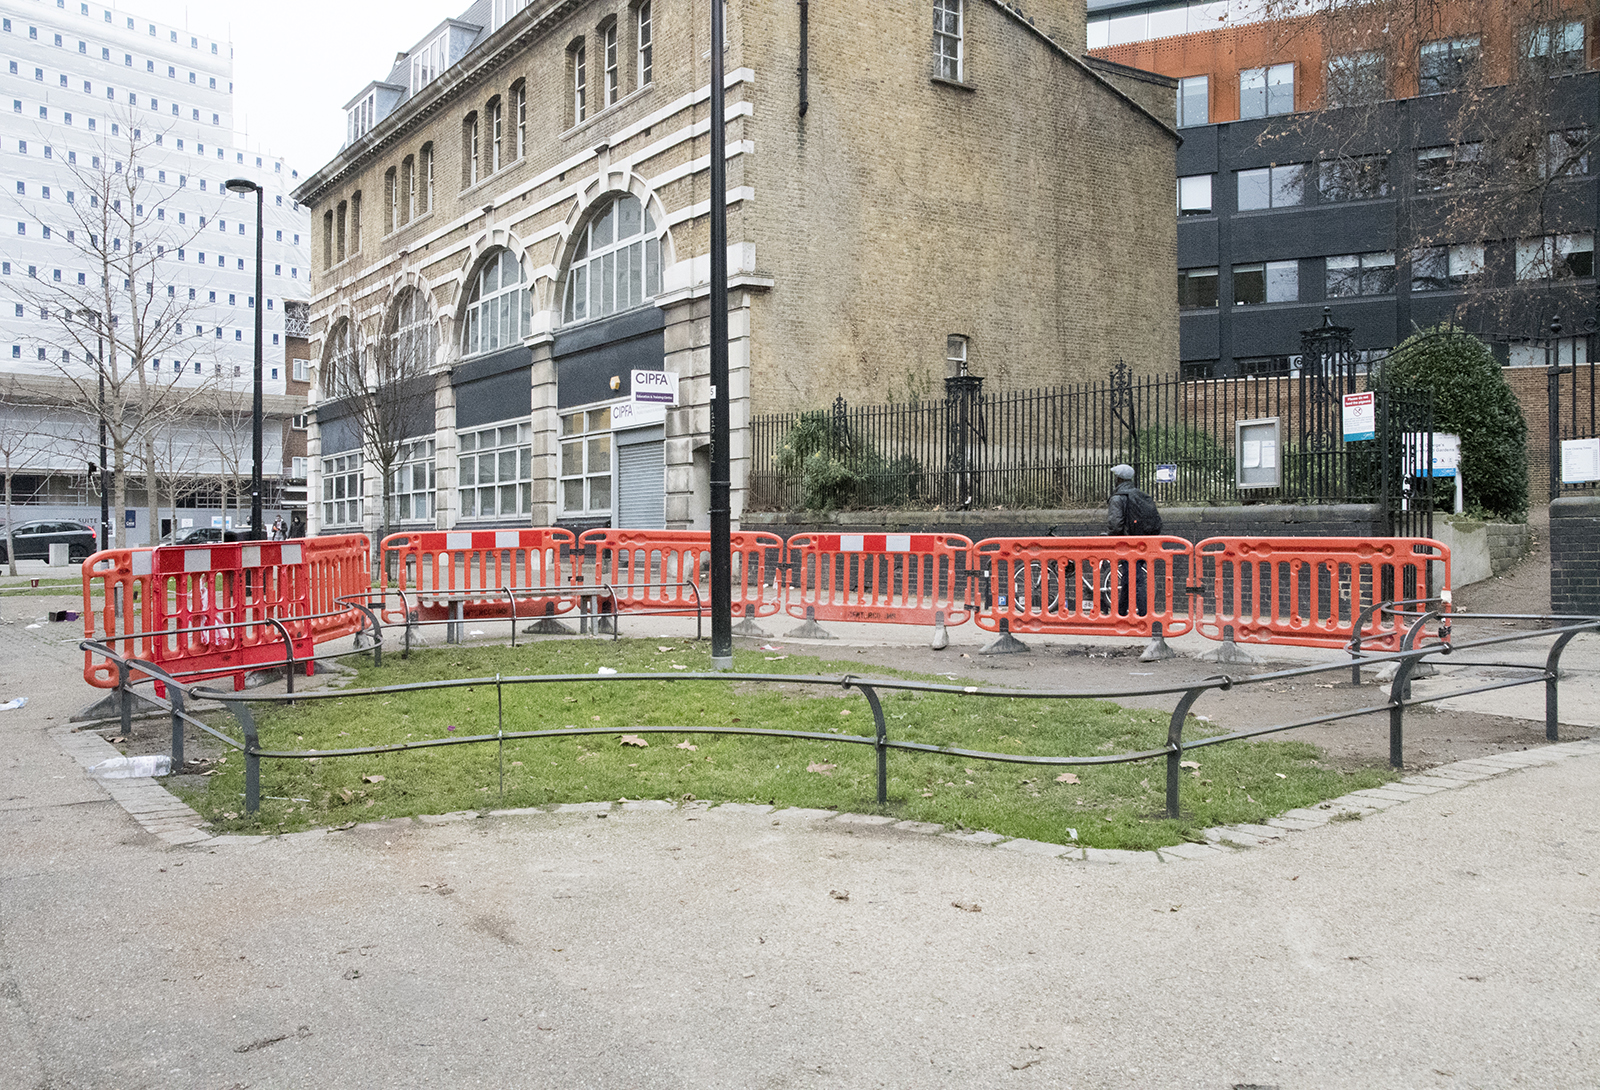 20161218_Lambeth_Beside-St-George-the-Martyr_Landscape_Winter_Is-this-the-smallest-most-fenced-bit-of-green-in-London